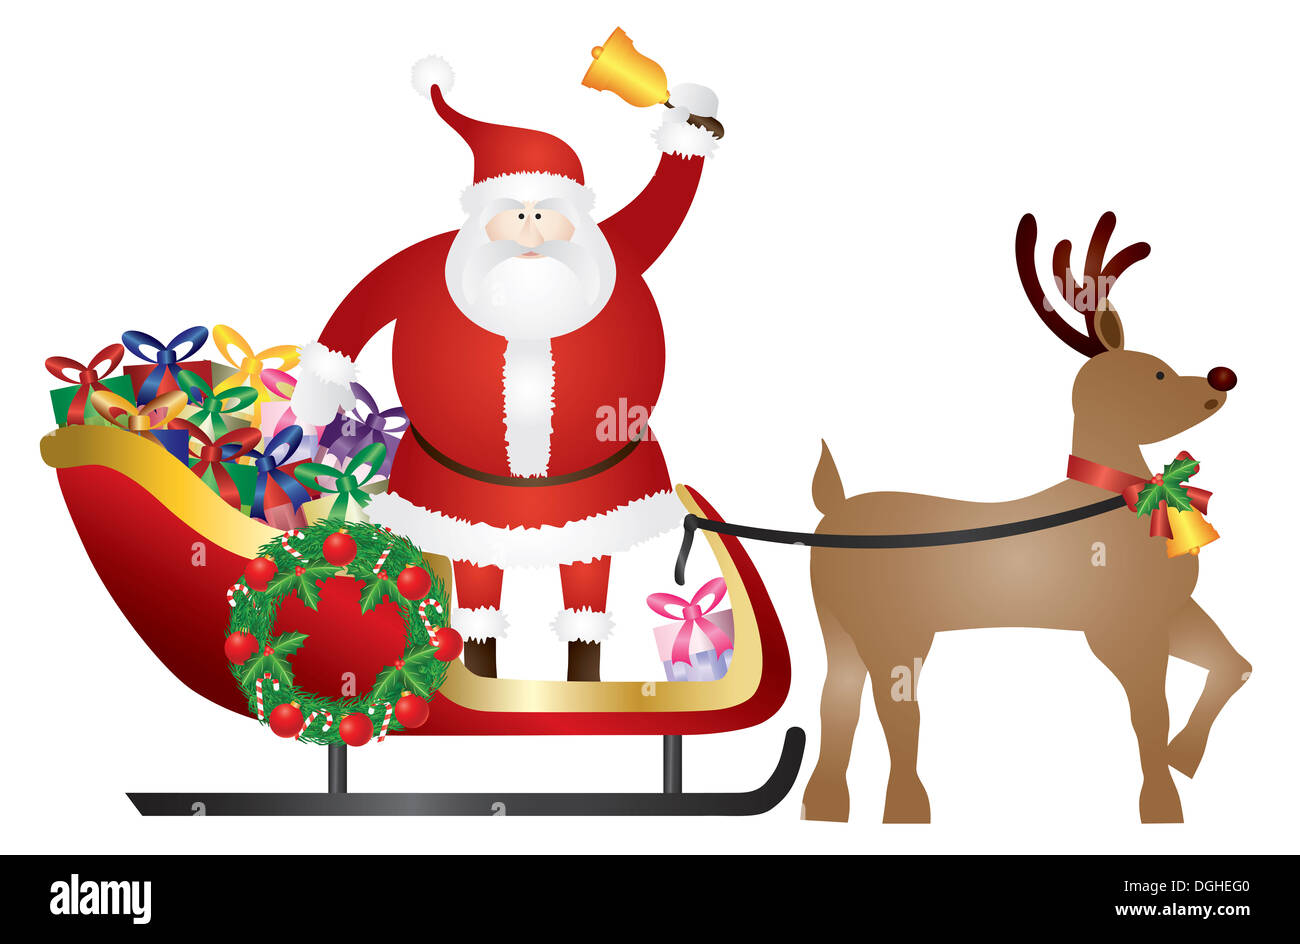 Santa Claus Ringing Bell in Sleigh Pulled by Reindeer Delivering Wrapped Presents Isolated on White Background Illustration Stock Photo